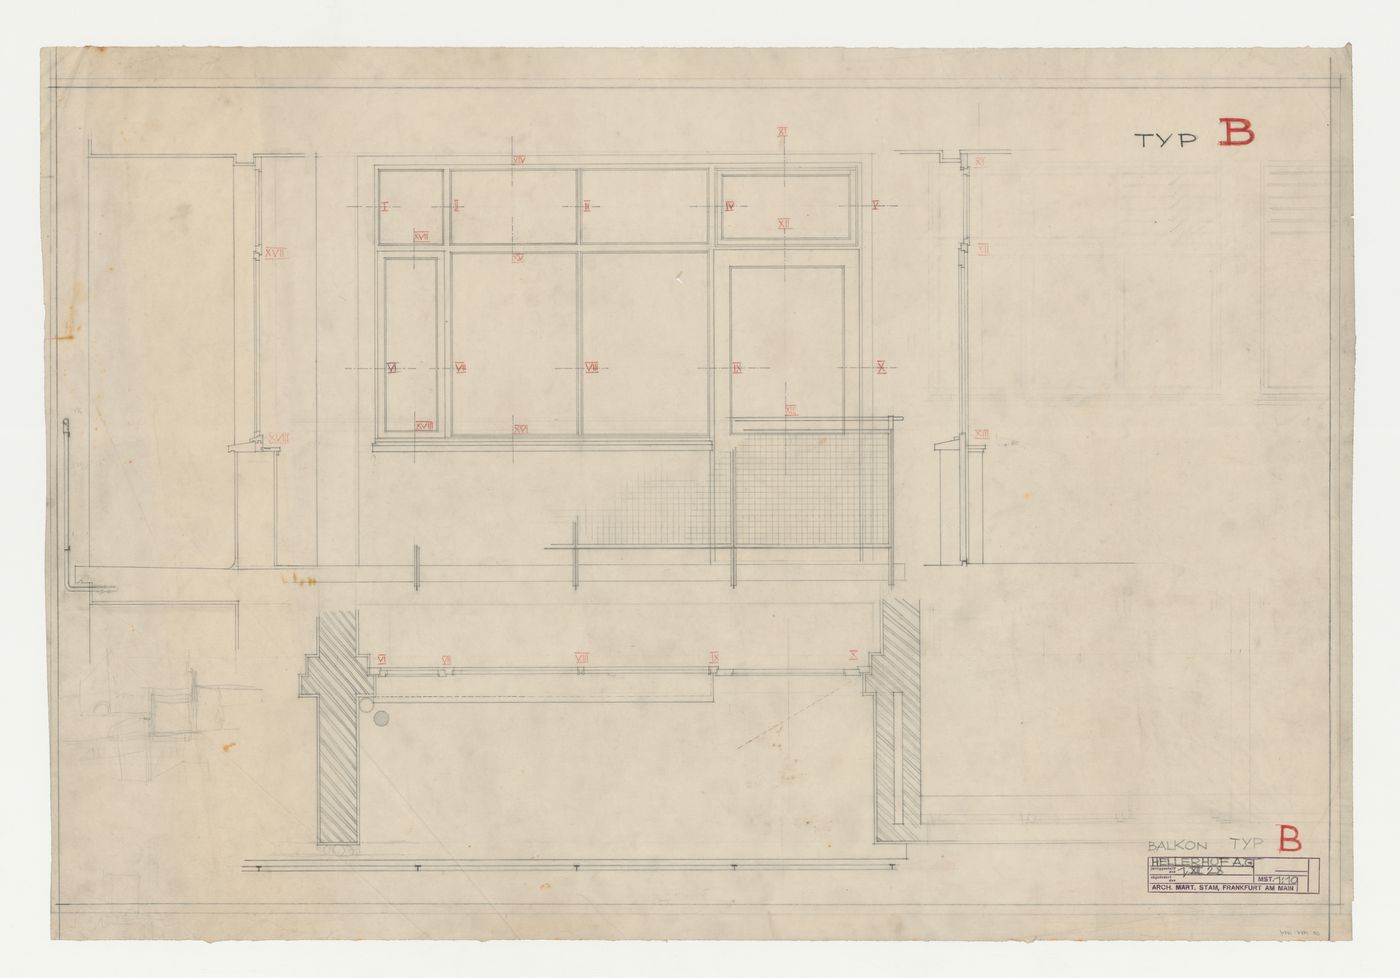 Plan, section, and elevation for a balcony for a type B housing unit, Hellerhof Housing Estate, Frankfurt am Main, Germany